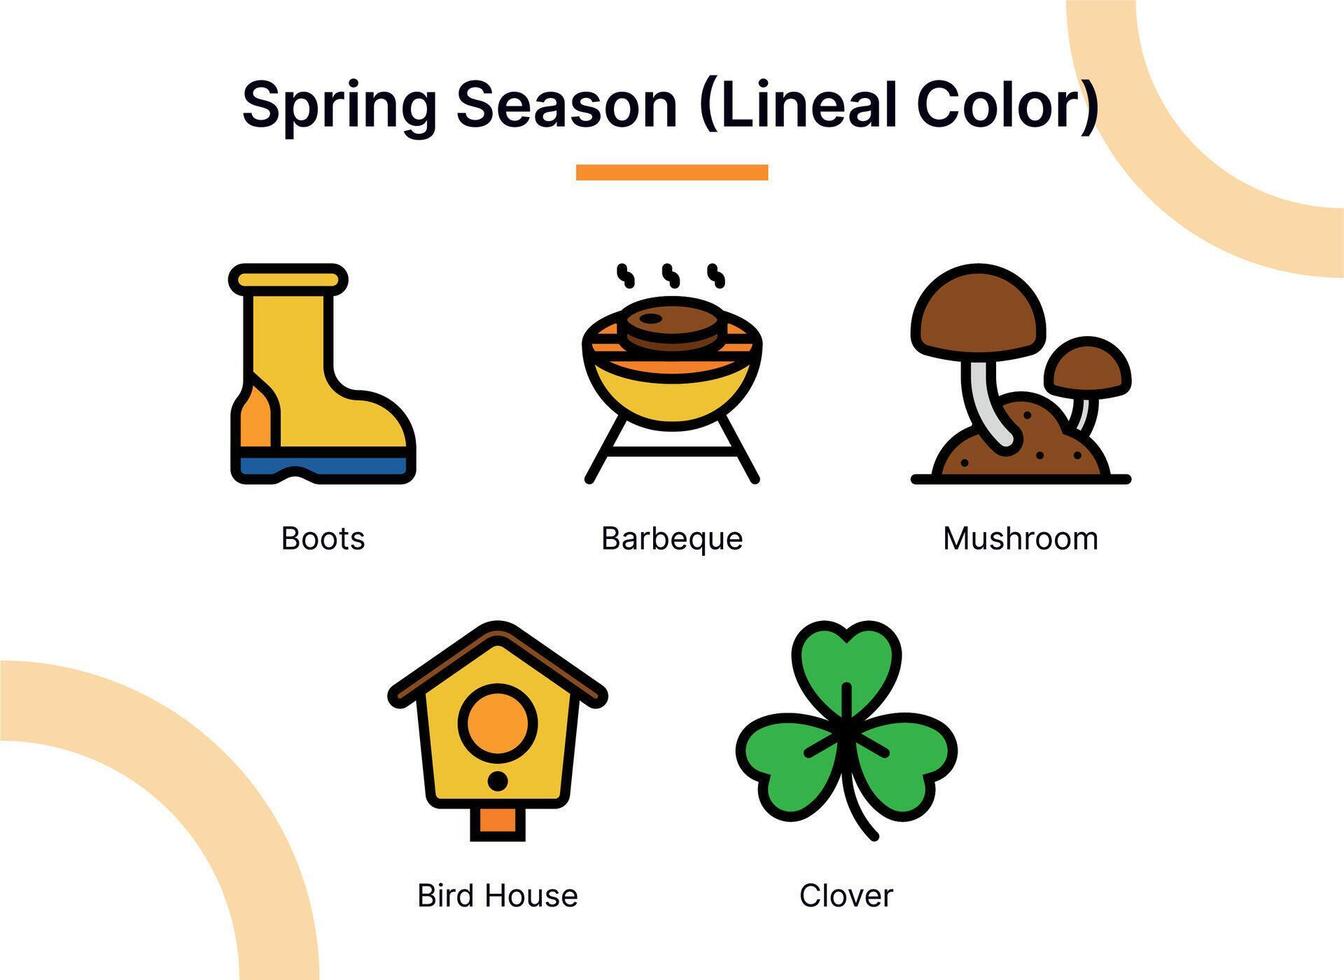 Spring Season Icon Set in Lineal Color Style Suitable for web and app icons, presentations, posters, etc. vector